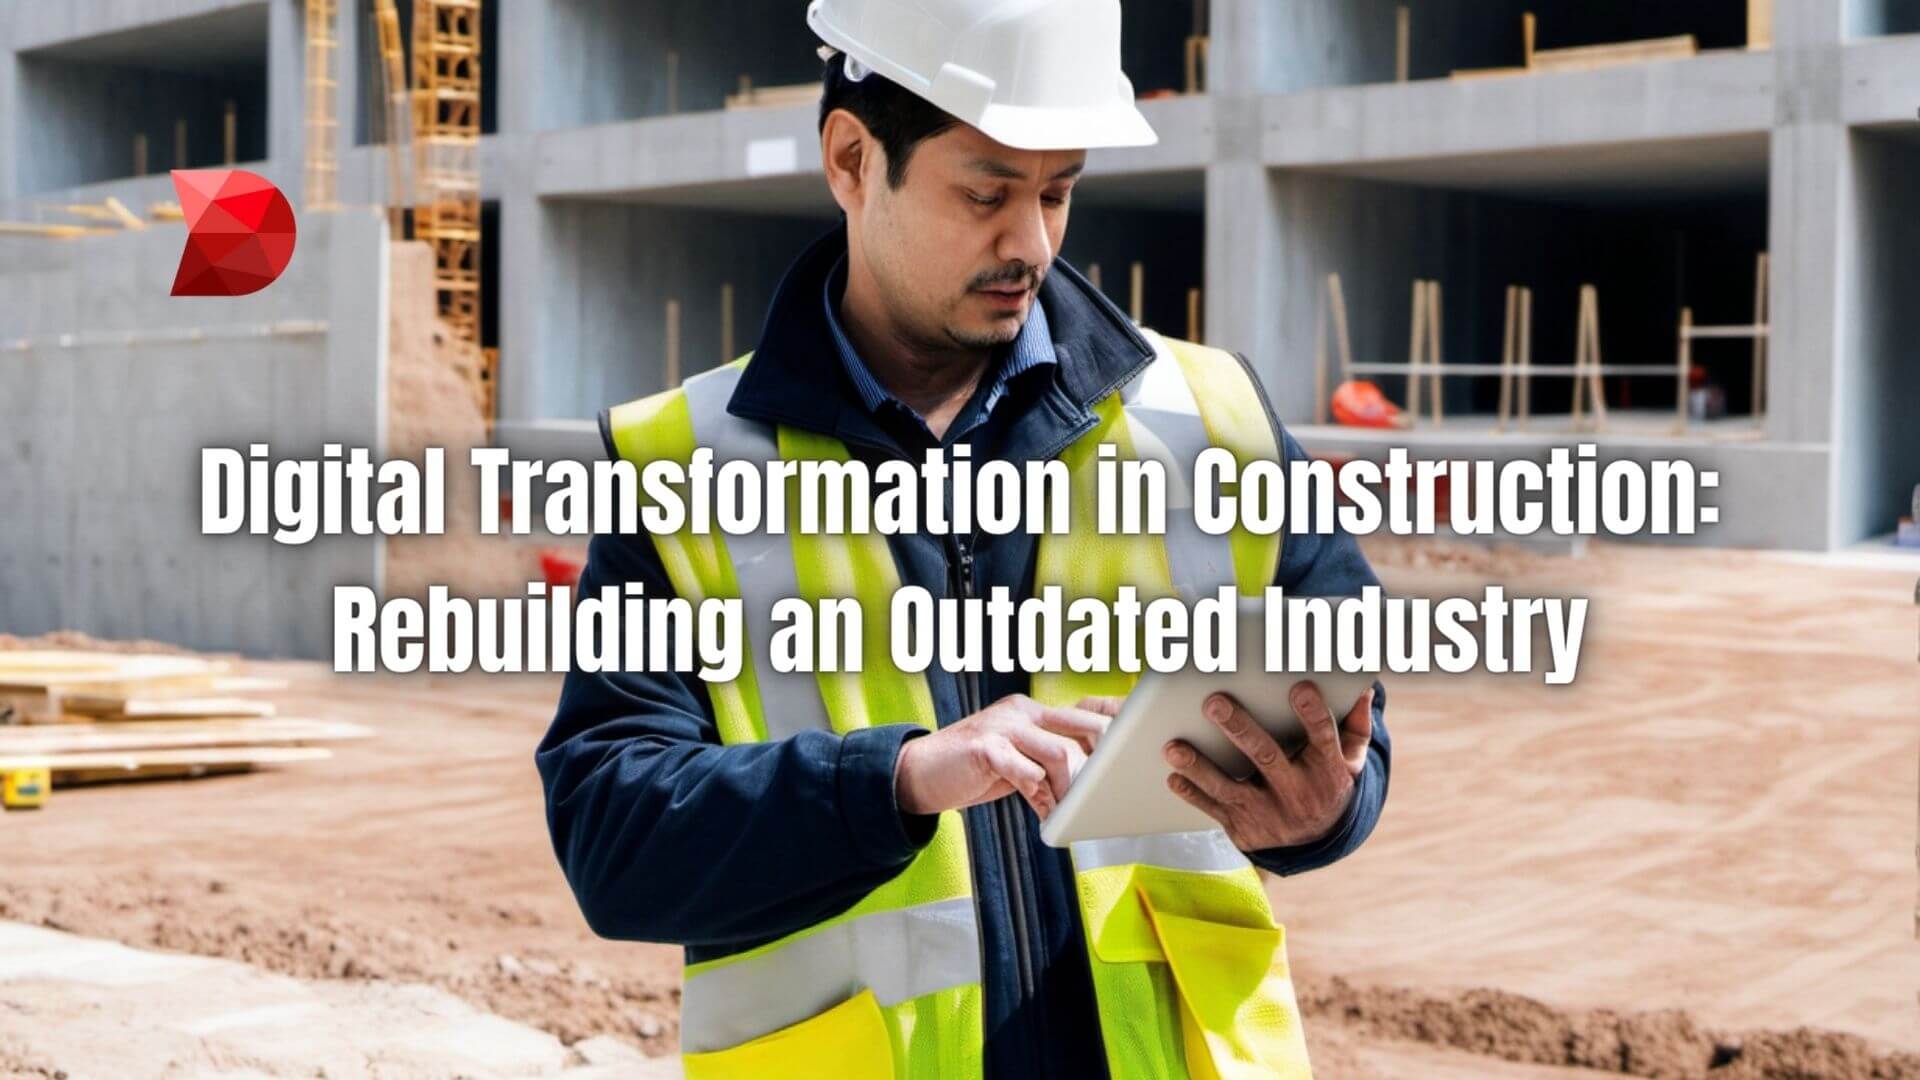 Unlock the potential of digital transformation in construction with our guide. Learn to rebuild and thrive in an evolving industry landscape.